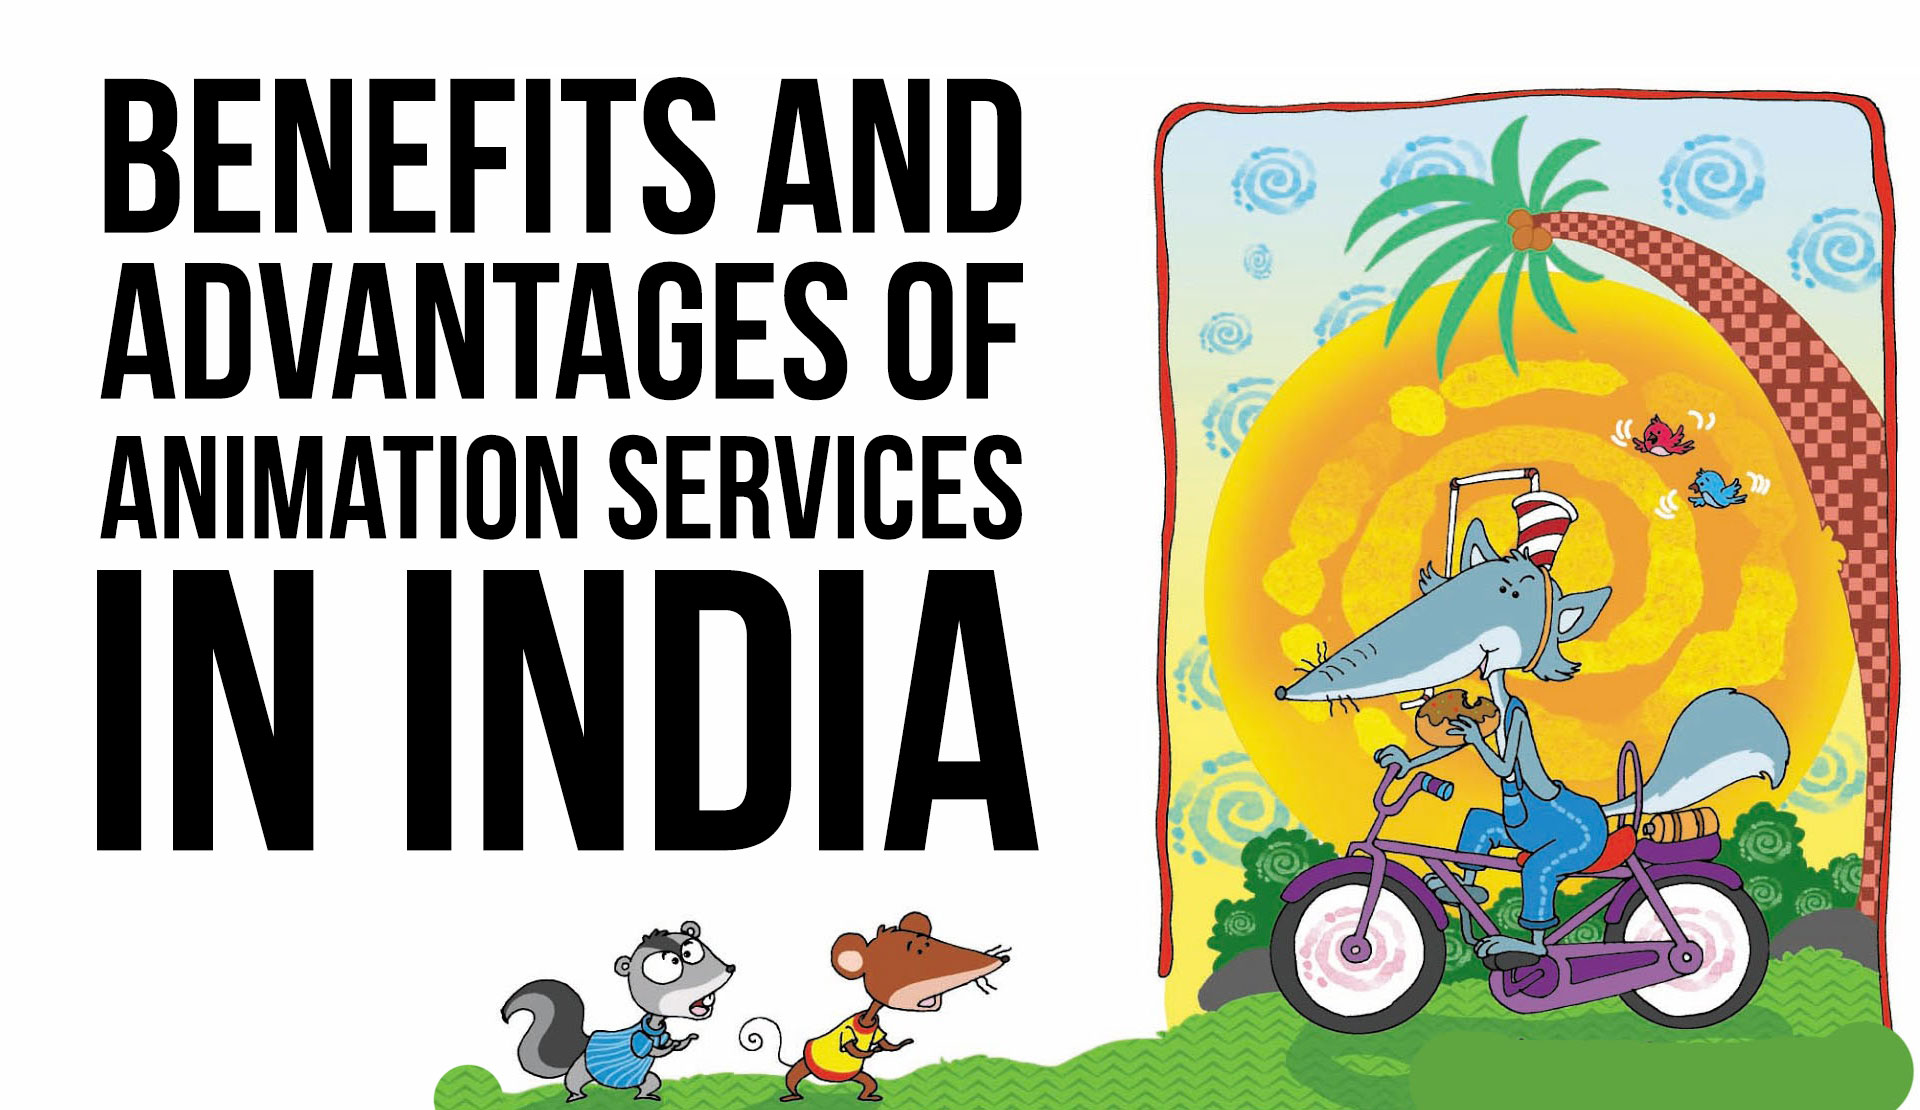 Benefits and Advantages of Animation Services in India